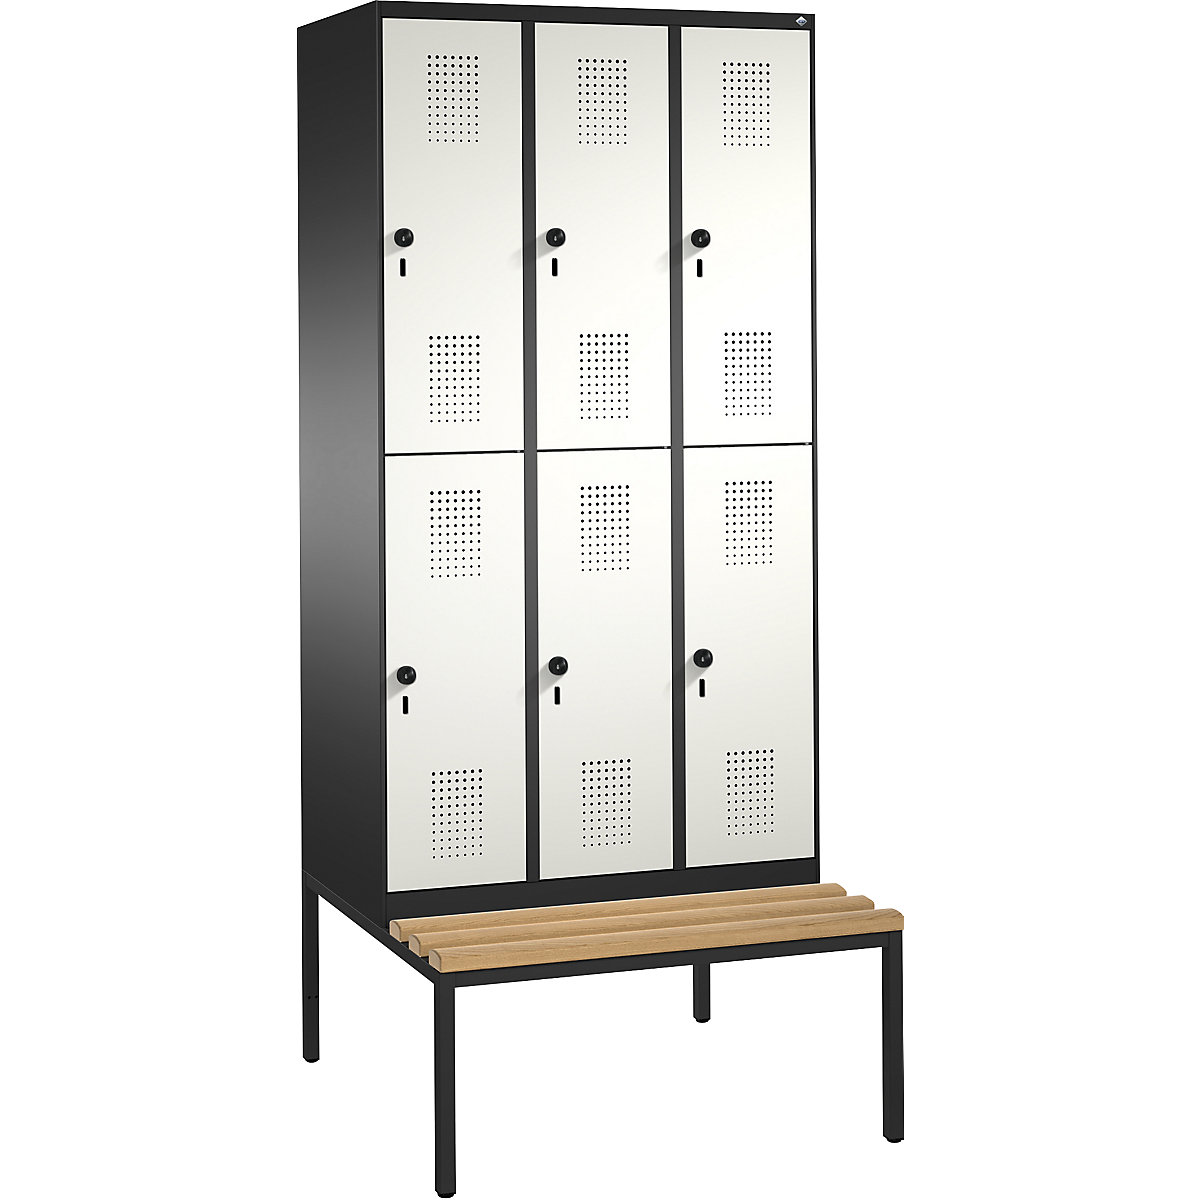 EVOLO cloakroom locker, double tier, with bench – C+P, 3 compartments, 2 shelf compartments each, compartment width 300 mm, black grey / pure white-12